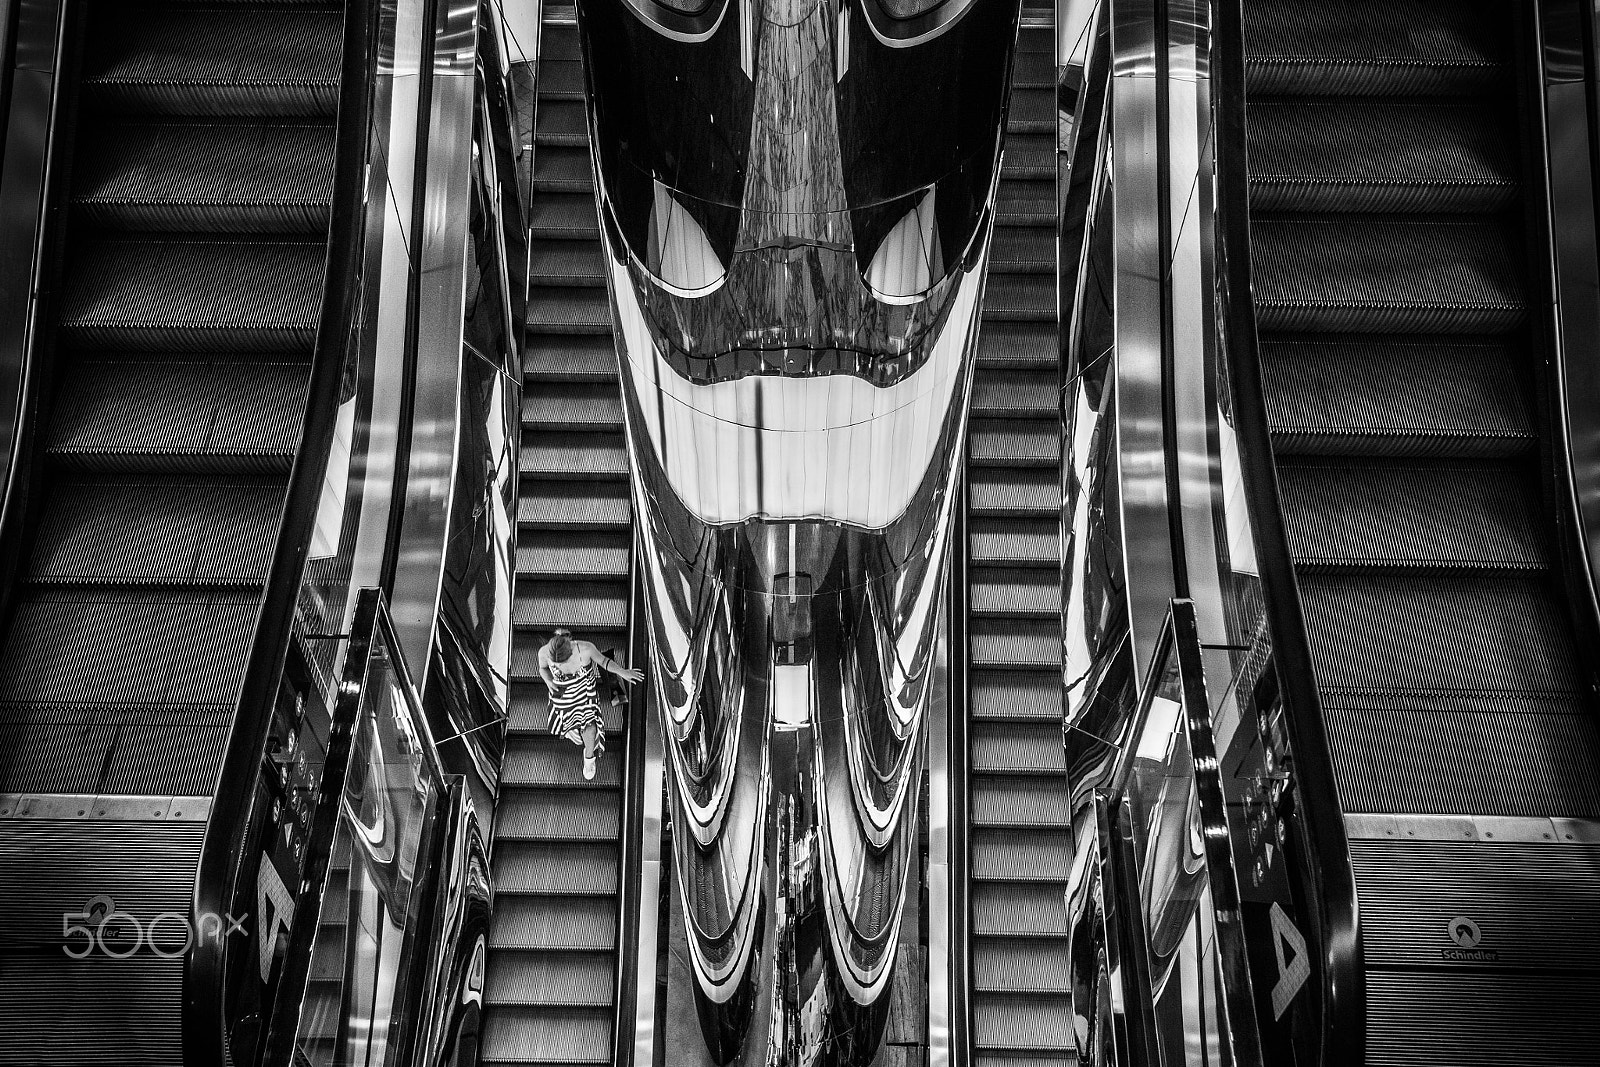 Canon EOS 70D + Sigma 24-105mm f/4 DG OS HSM | A sample photo. Her and the escalator. photography